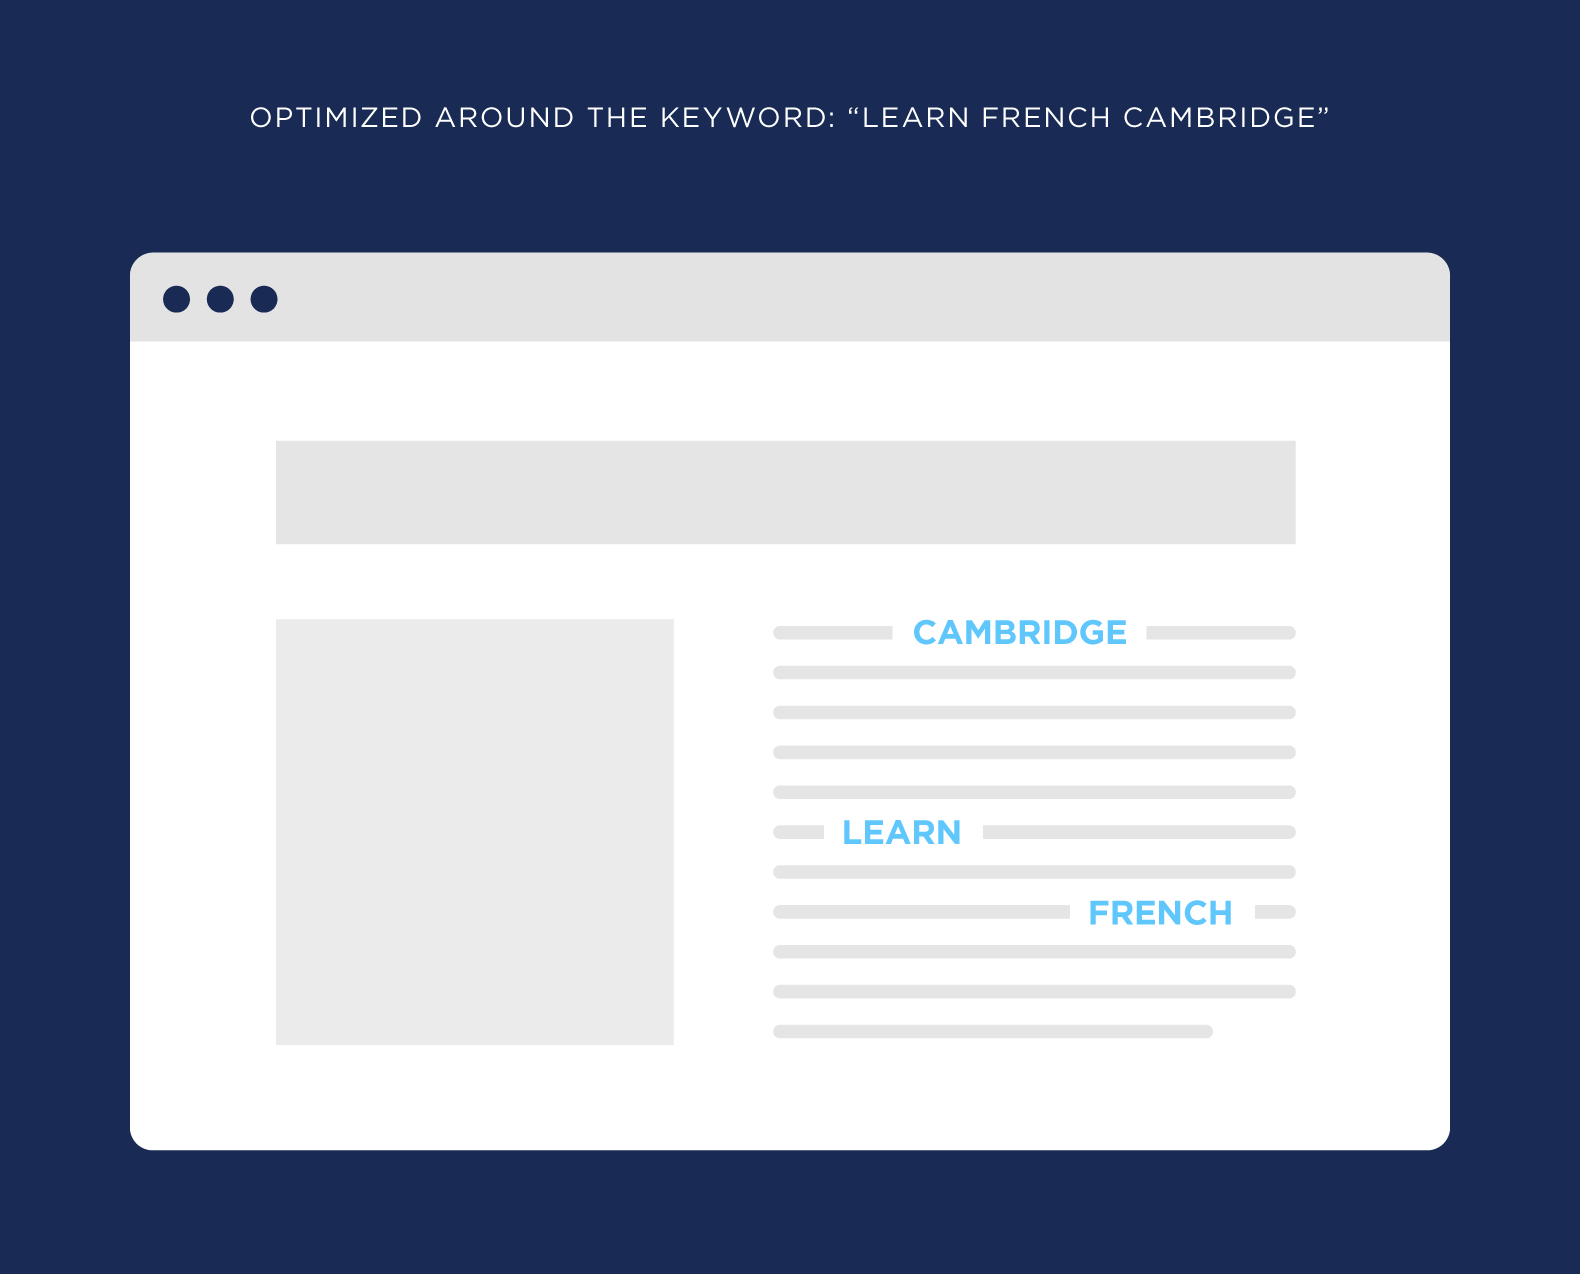 Optimized around the keyword "Learn French Cambridge"